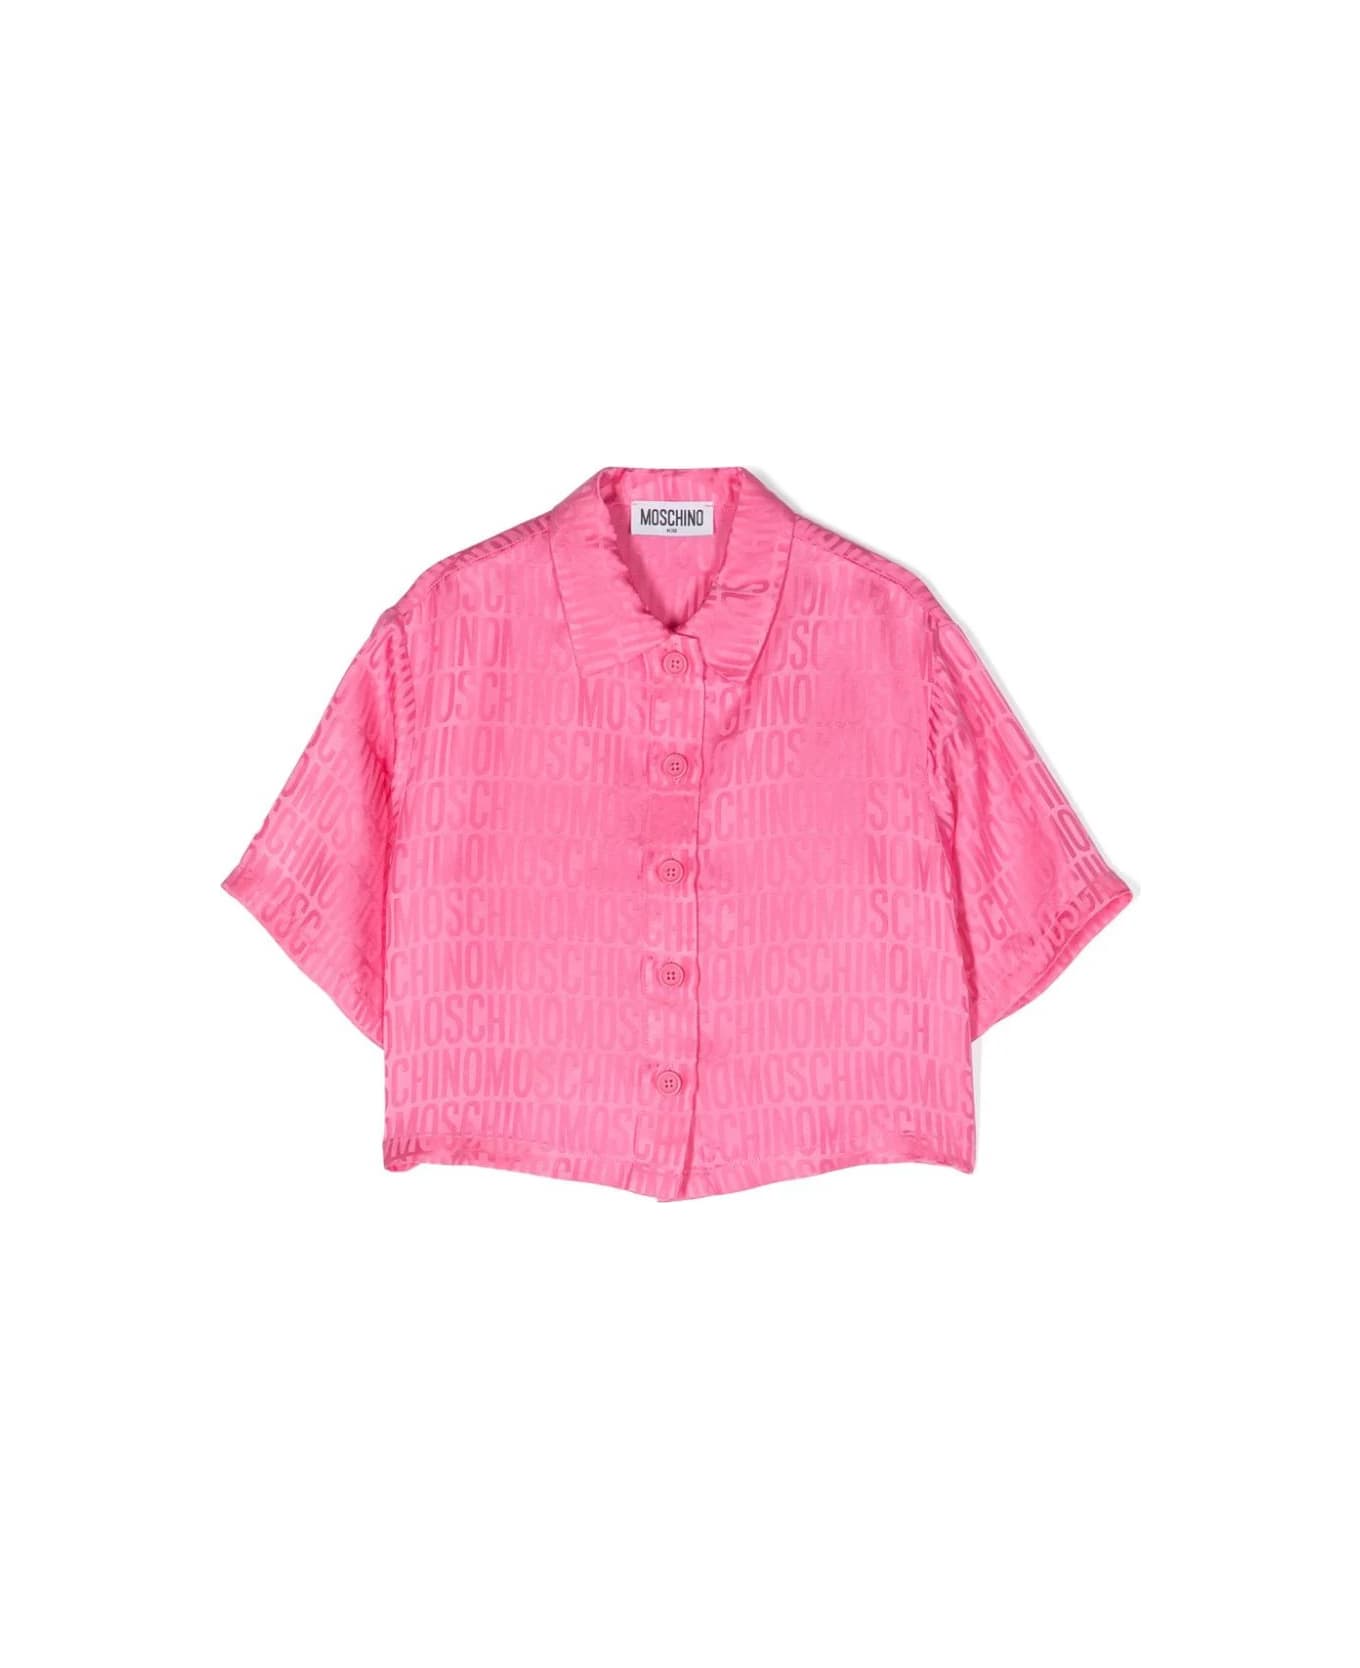 Moschino Pink Shirt With All-over Jacquard Logo - Pink シャツ